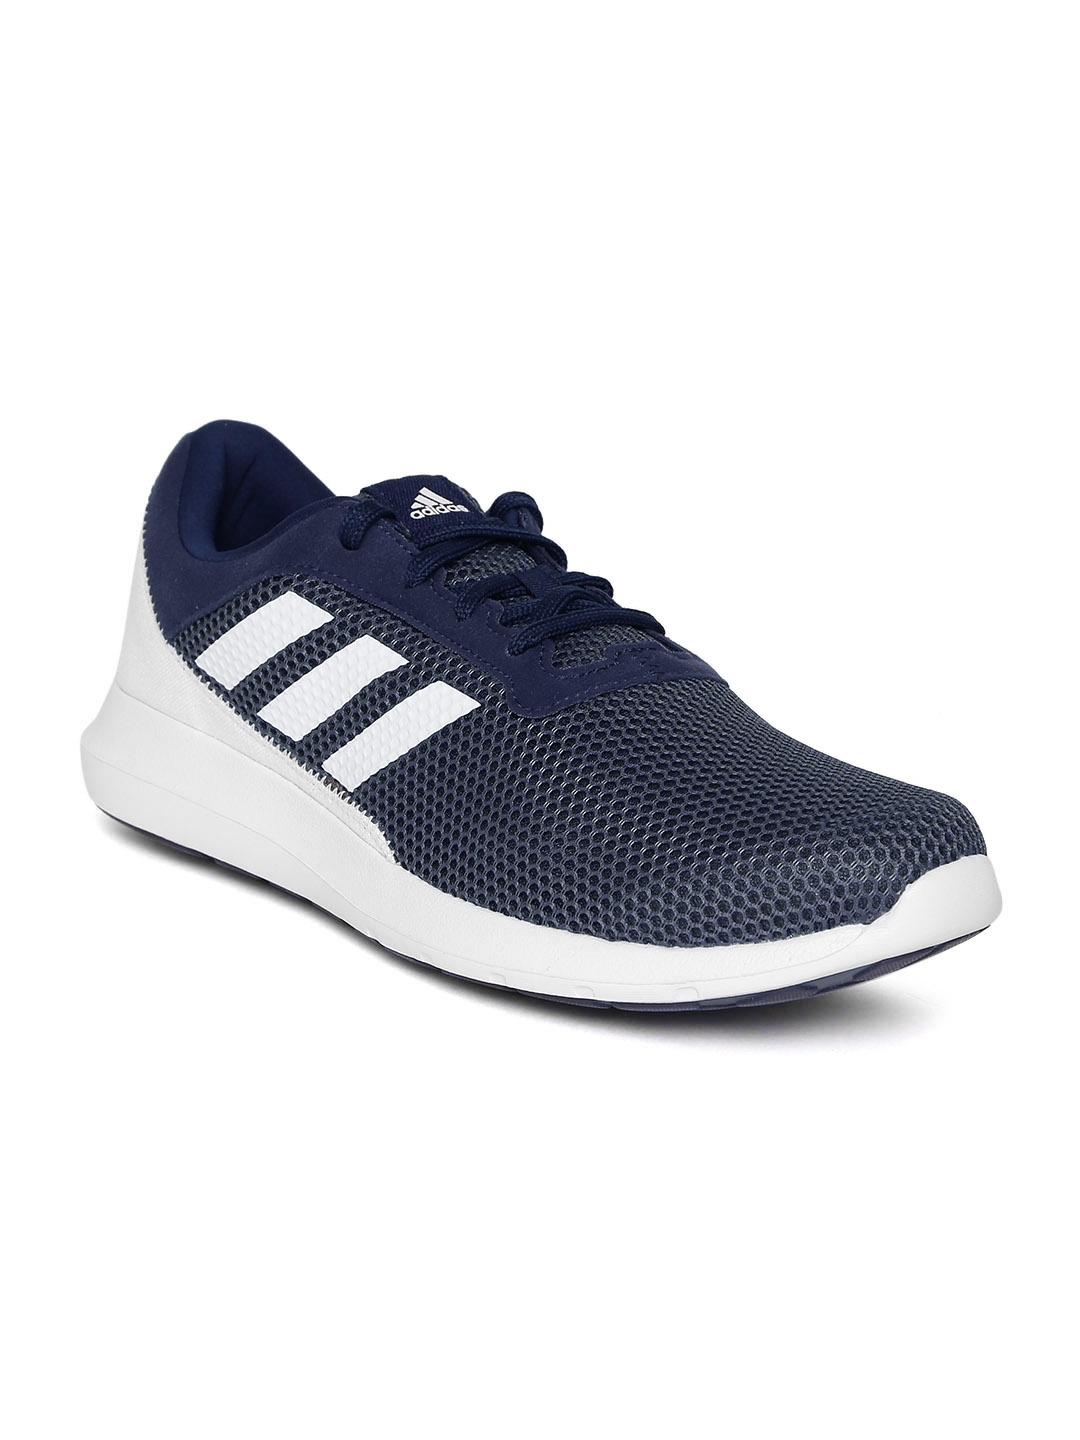 Buy ADIDAS Men Navy ELEMENT REFRESH Running Shoes - Sports Shoes for